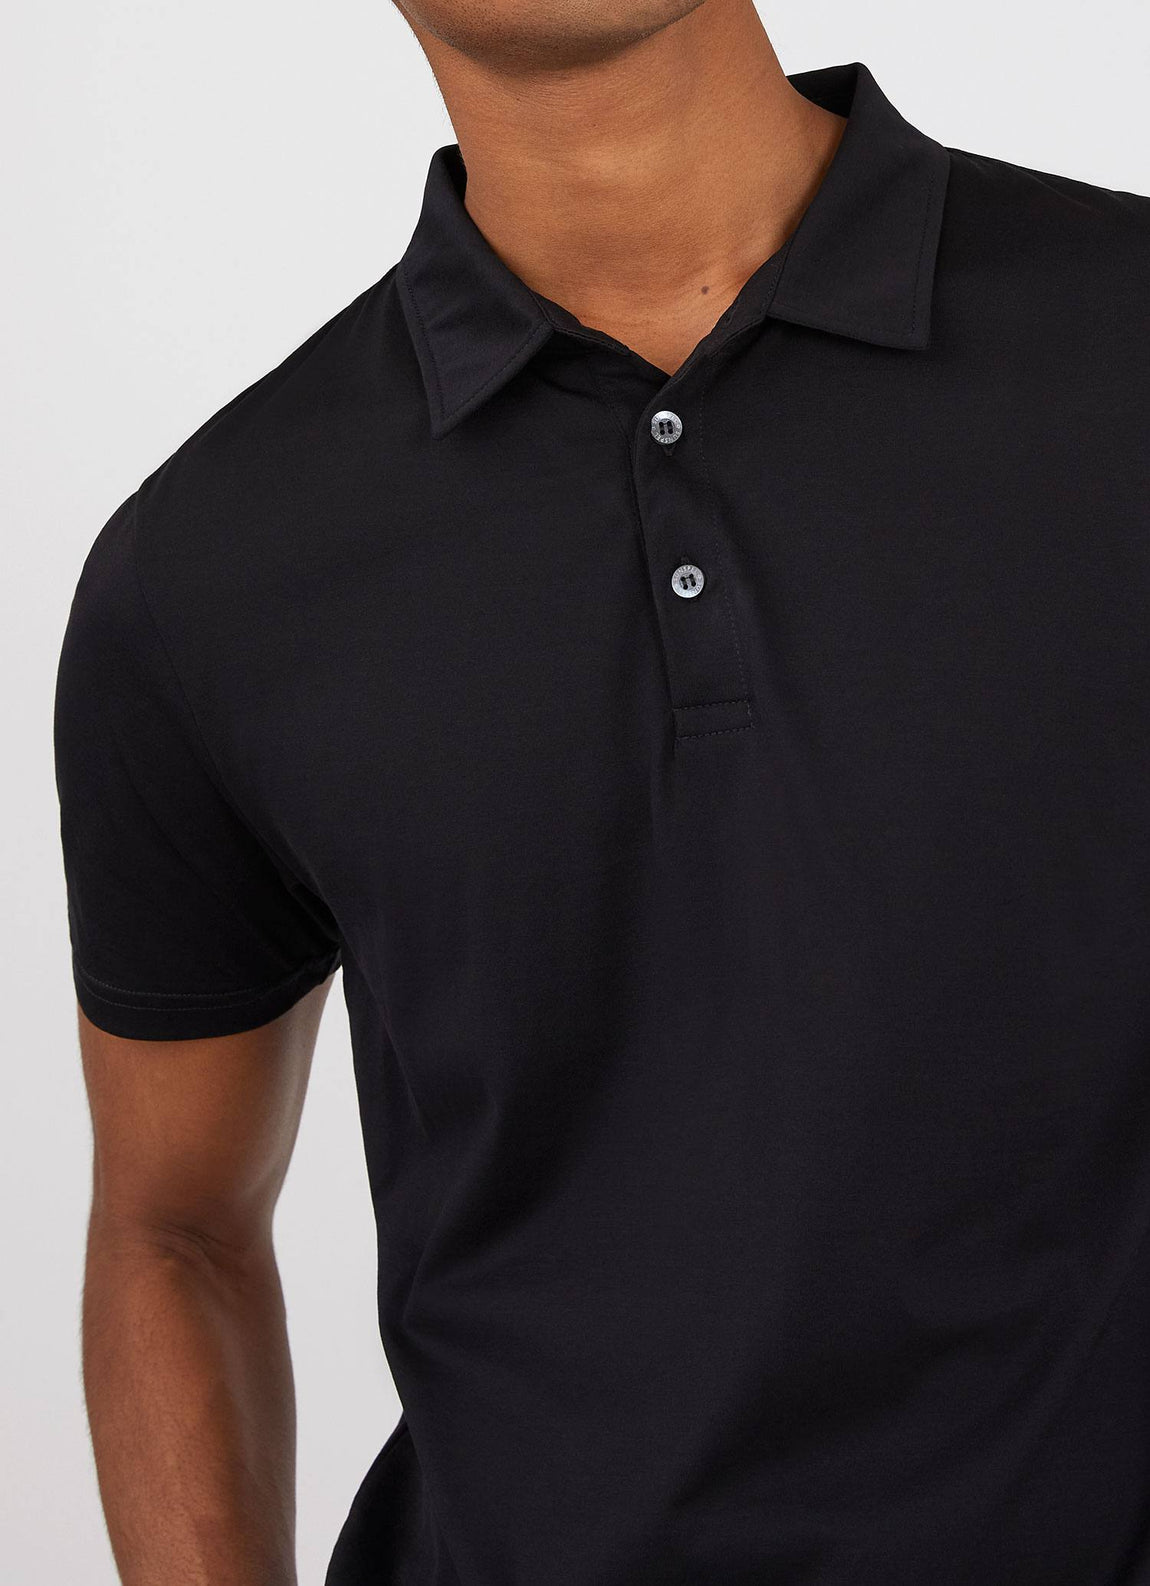 Men's Jersey Classic Polo Shirt in Black